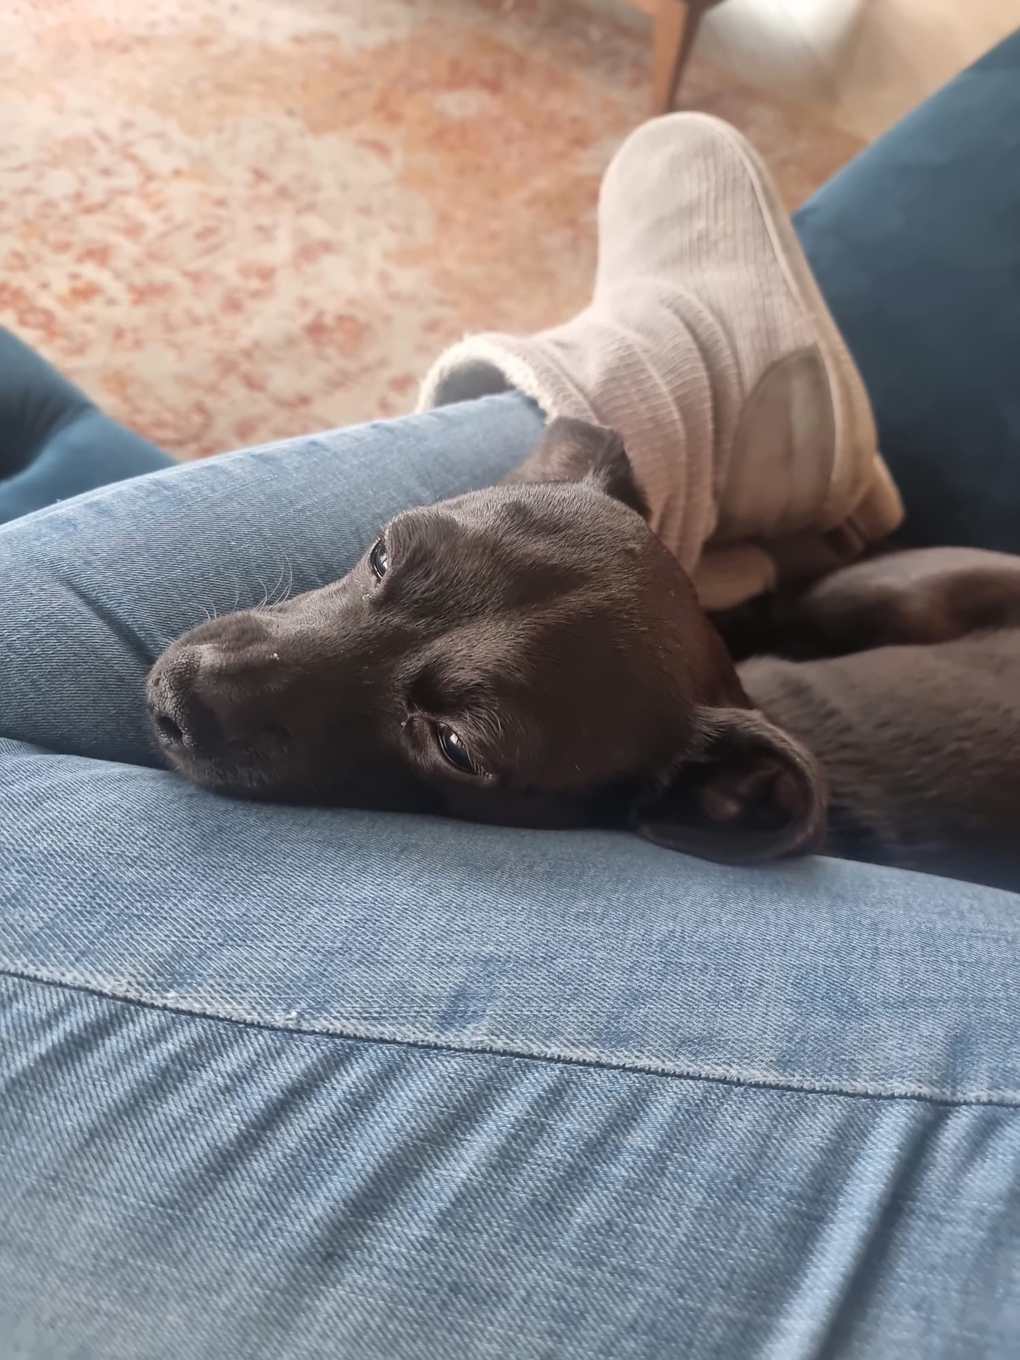 Puppy snoozing in the crook of a leg